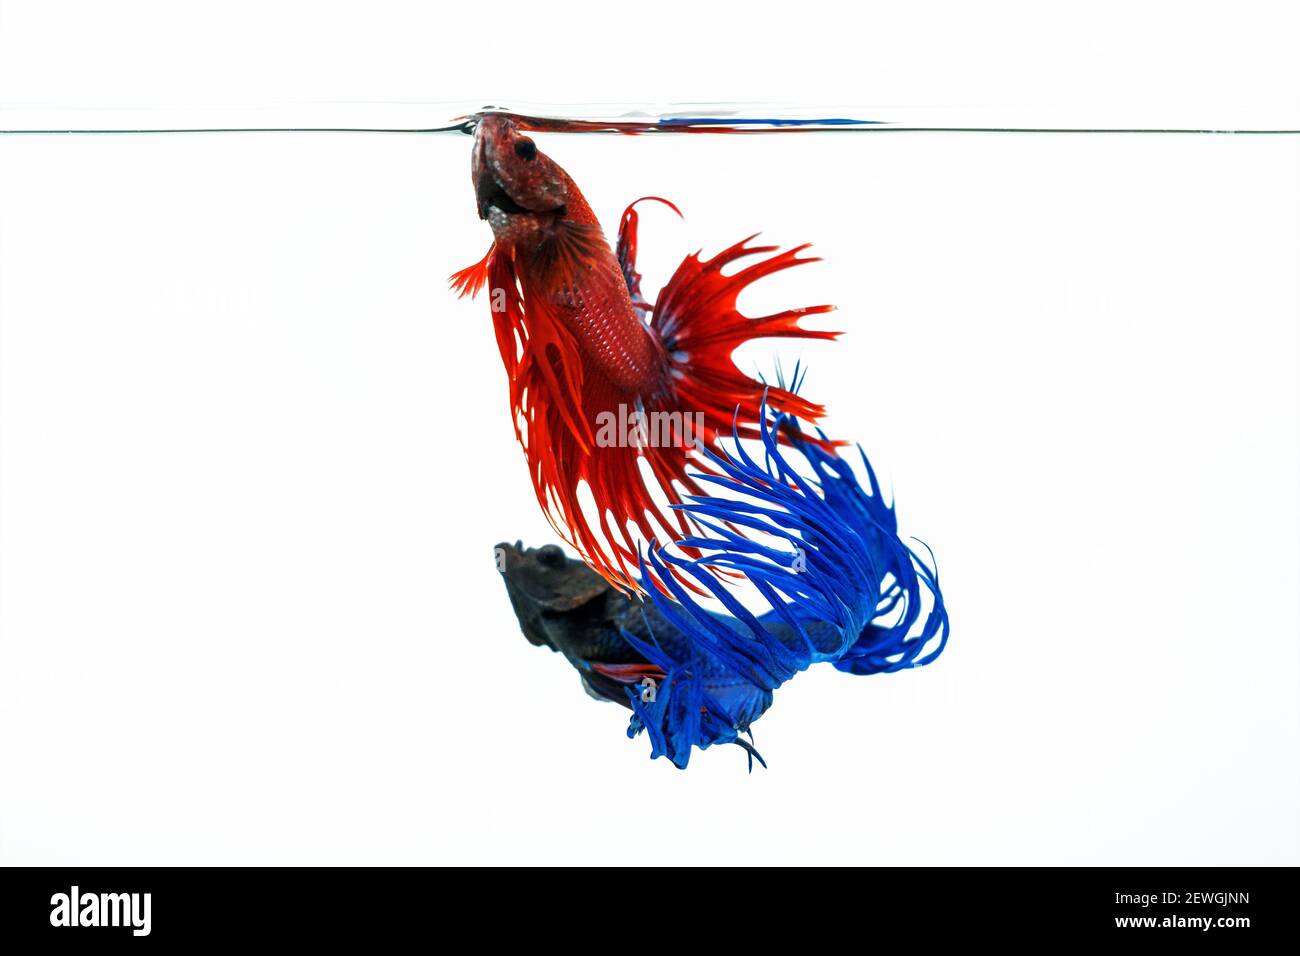 Blue and red betta fish, fighting fish isolated on white background. Stock Photo